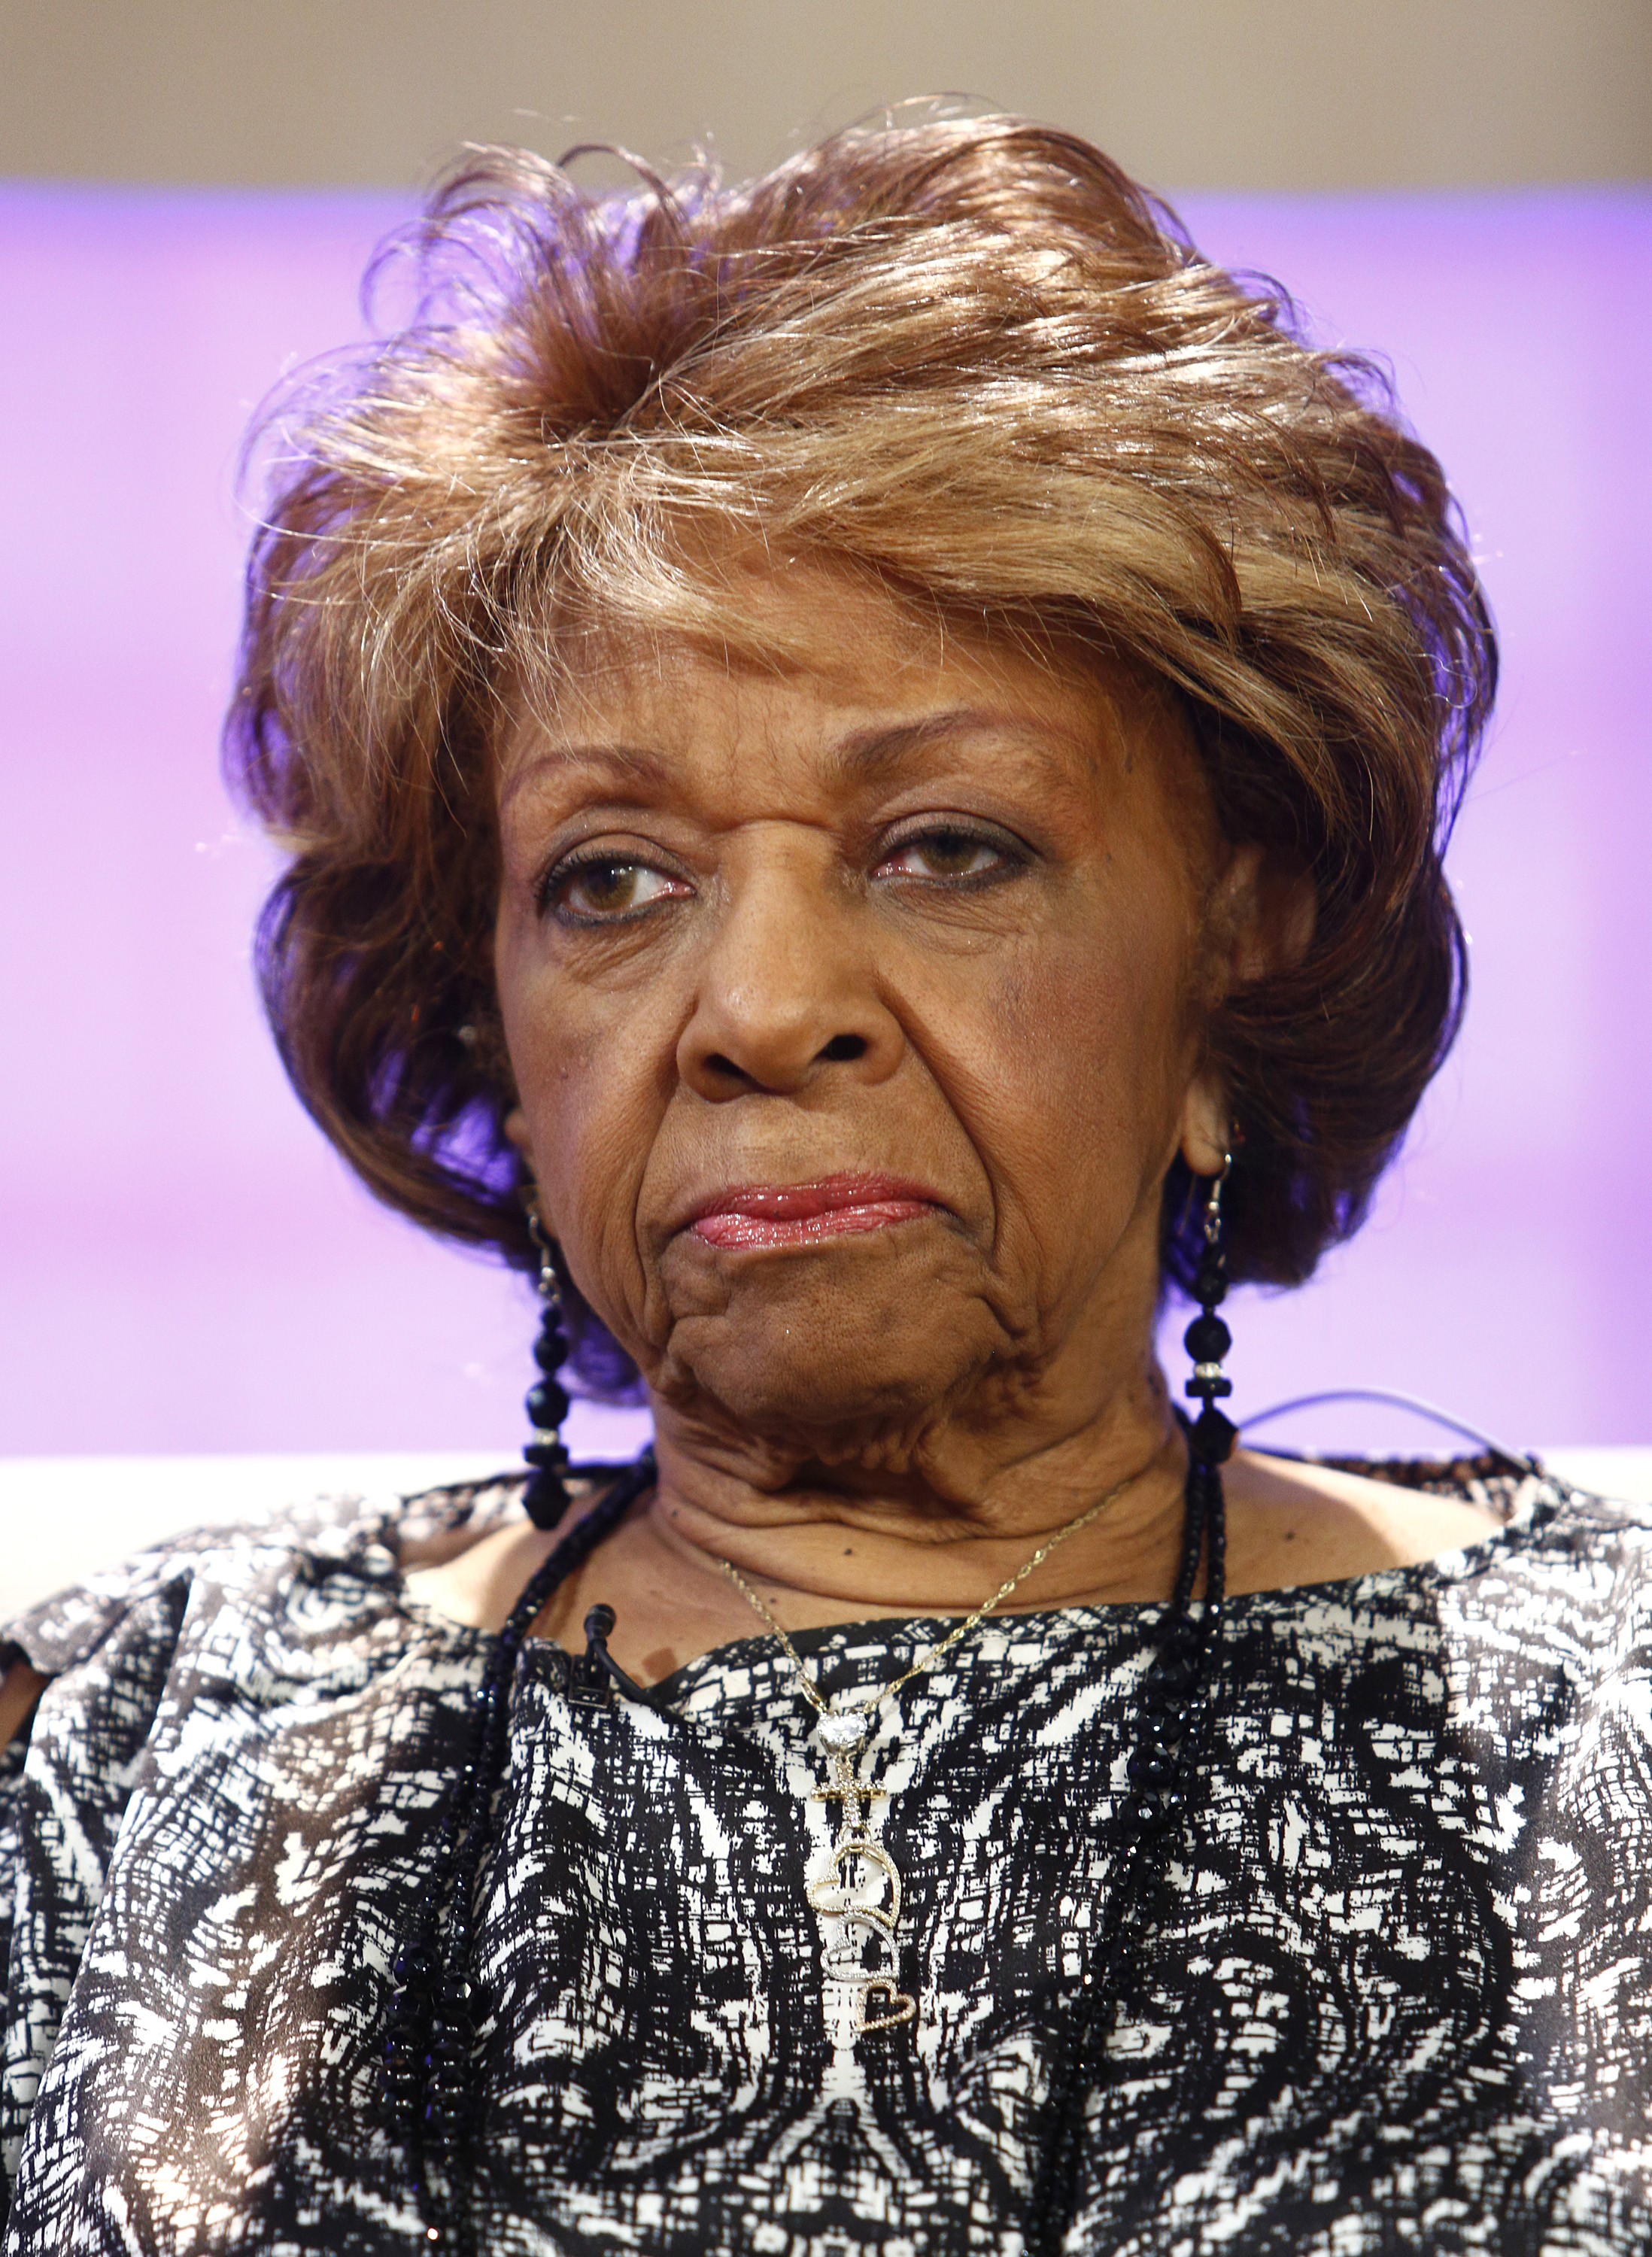 Cissy Houston on the "Today" show in 2013 | Source: Getty Images